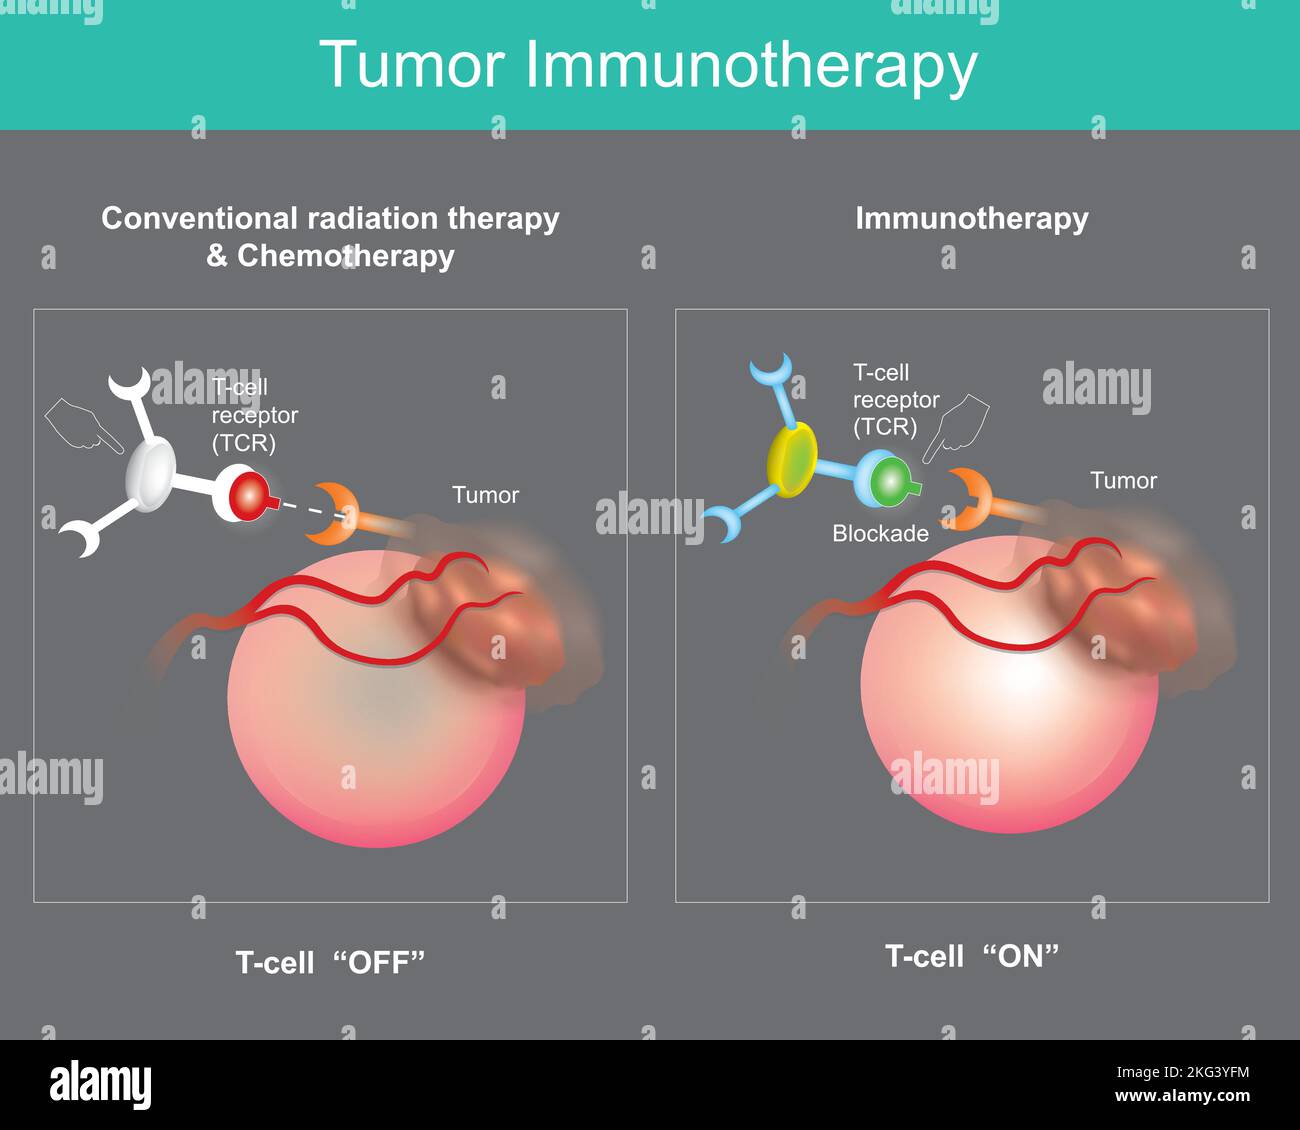 Tumor Immunotherapy. Cancer treatment that use the body's own immune system to prevent, control, and eliminate cancer cells. Stock Vector